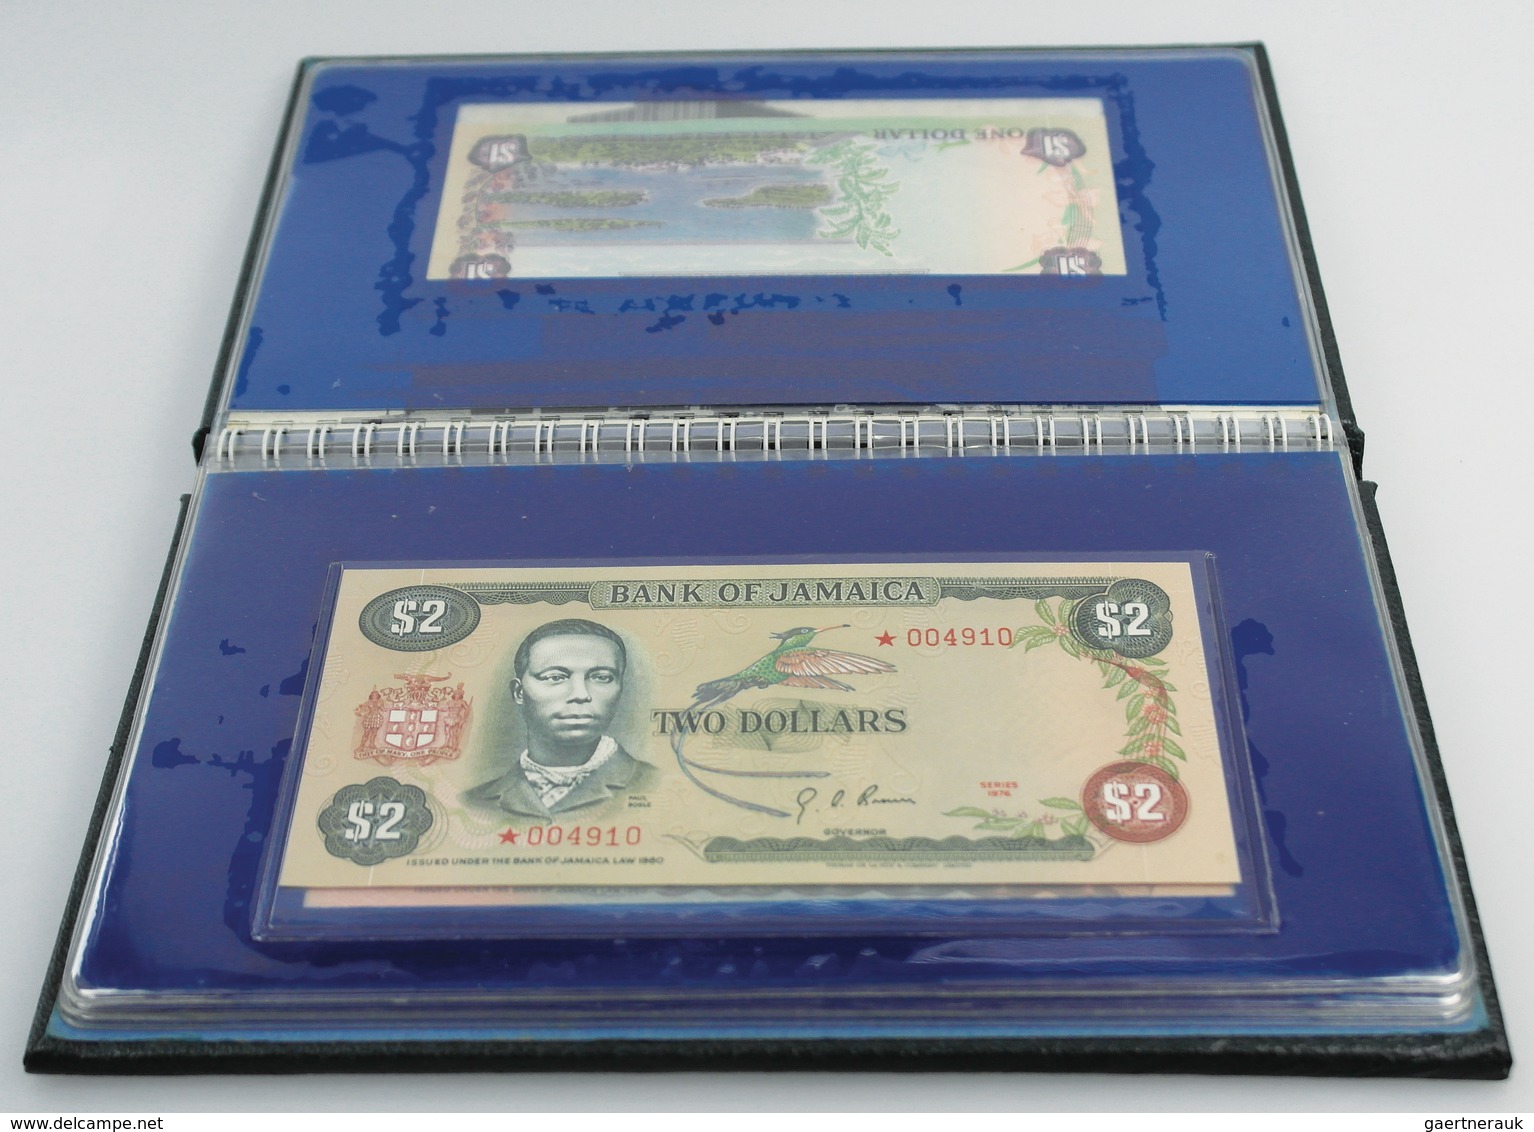 01886 Jamaica: Offical Currency Album Of The Bank Of Jamaica, With Certificate, Containing Notes With "Sta - Jamaica